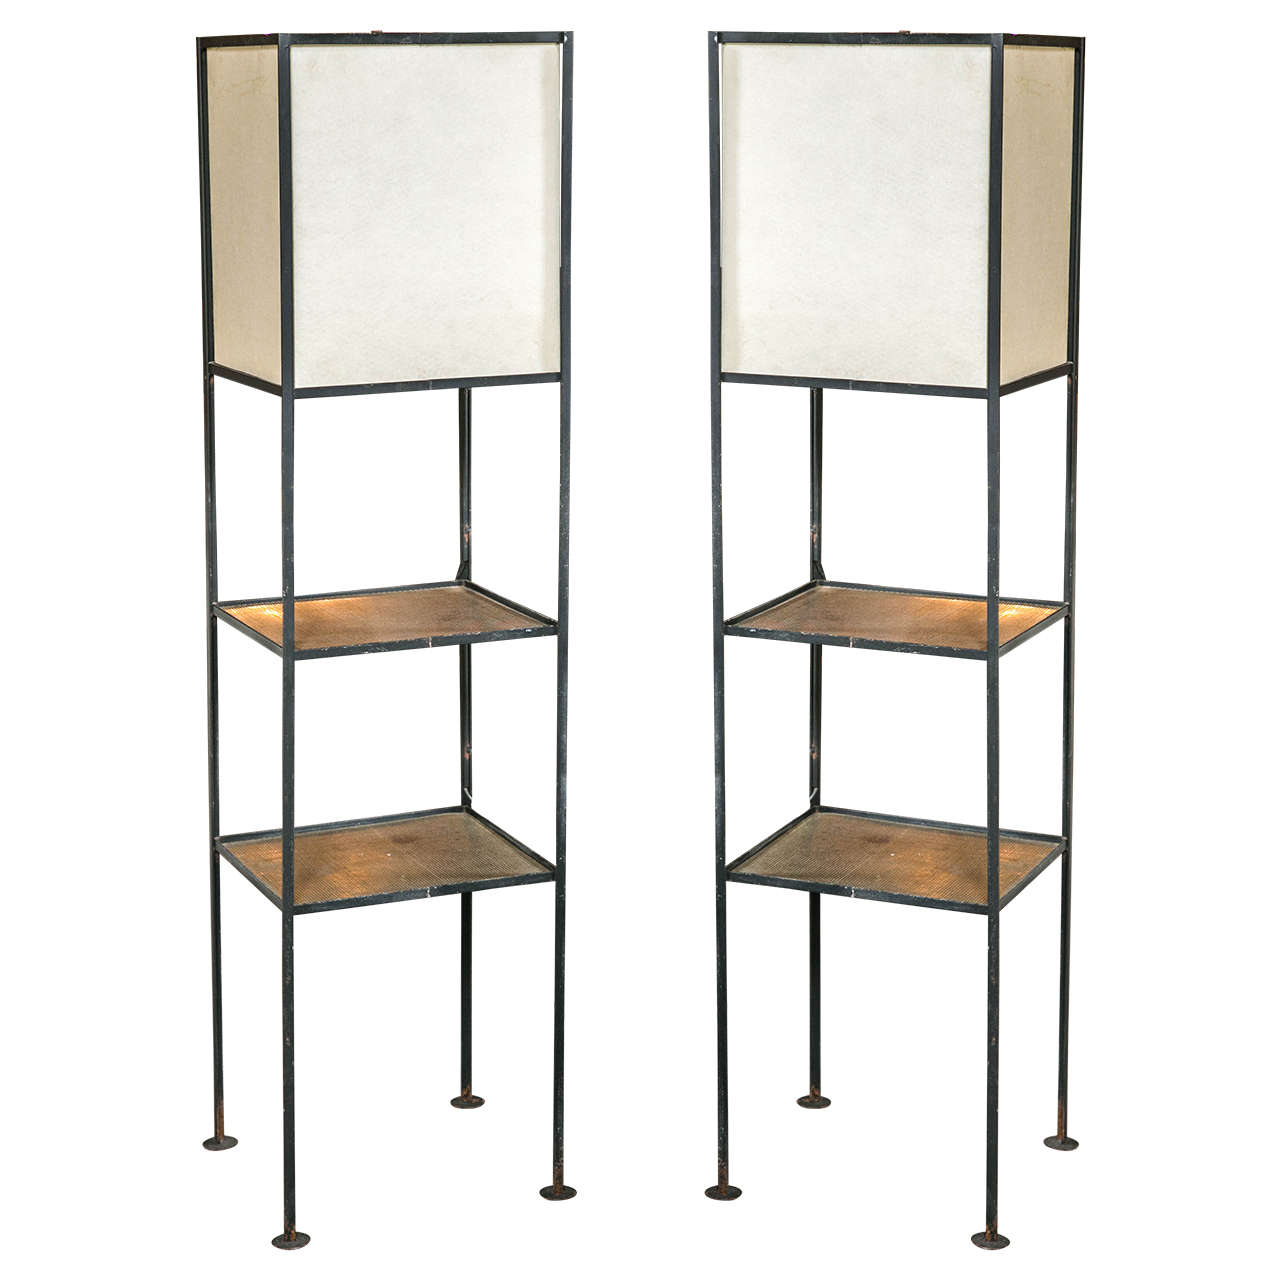 Pair of Mid-Century Modern Floor Lamps For Sale